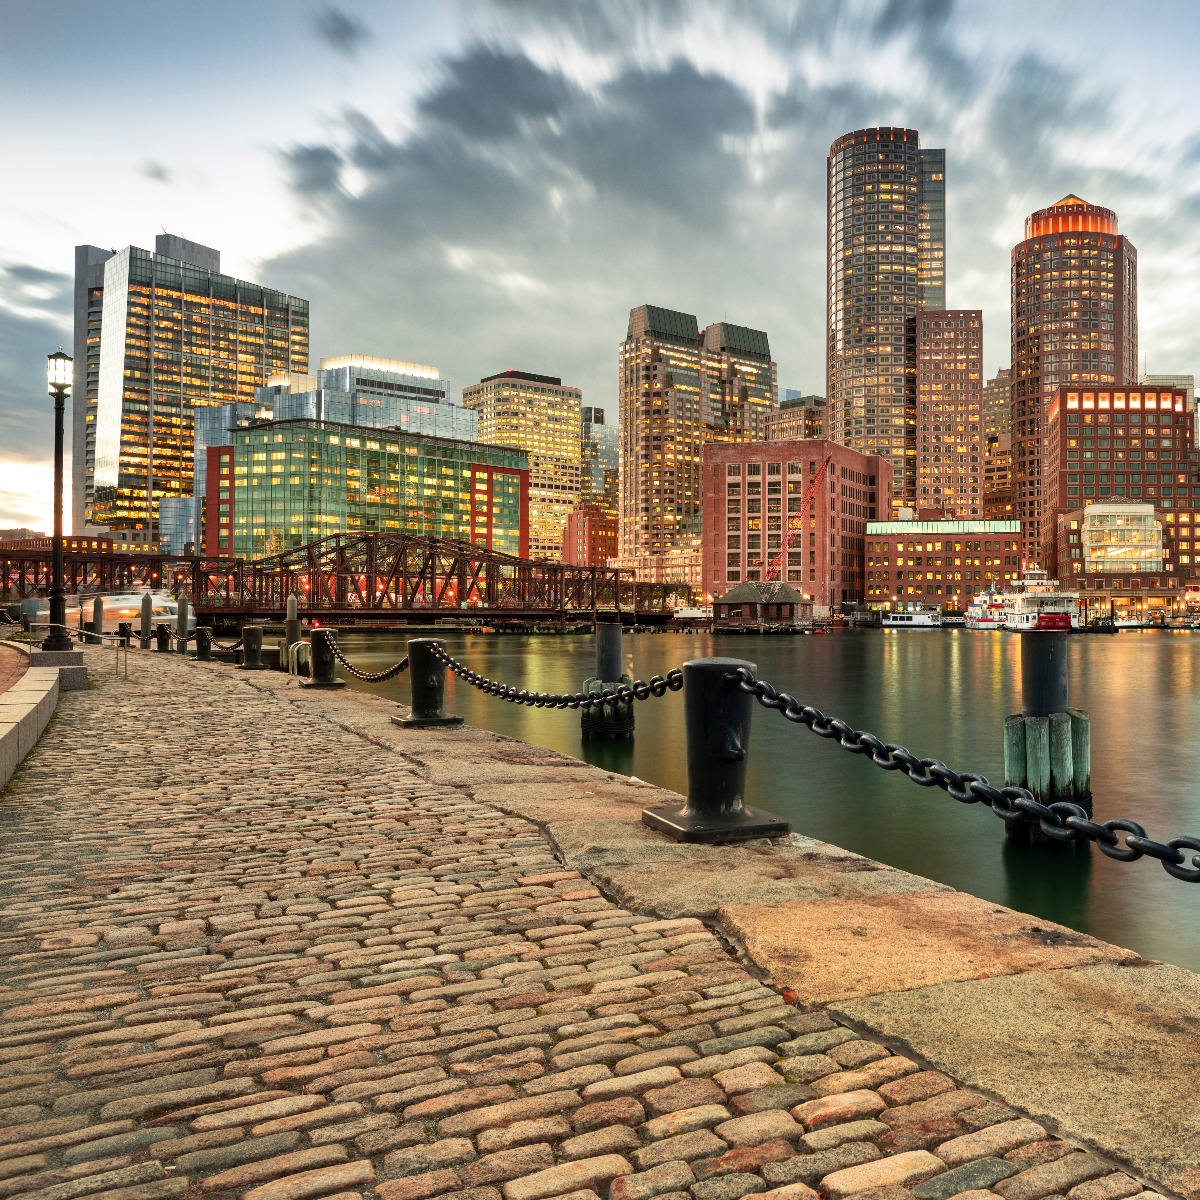 Downtown skyline city view of Boston Massachusetts USA looking over the riverfront harbor and marina boat dock from Fan Pier Park at night
